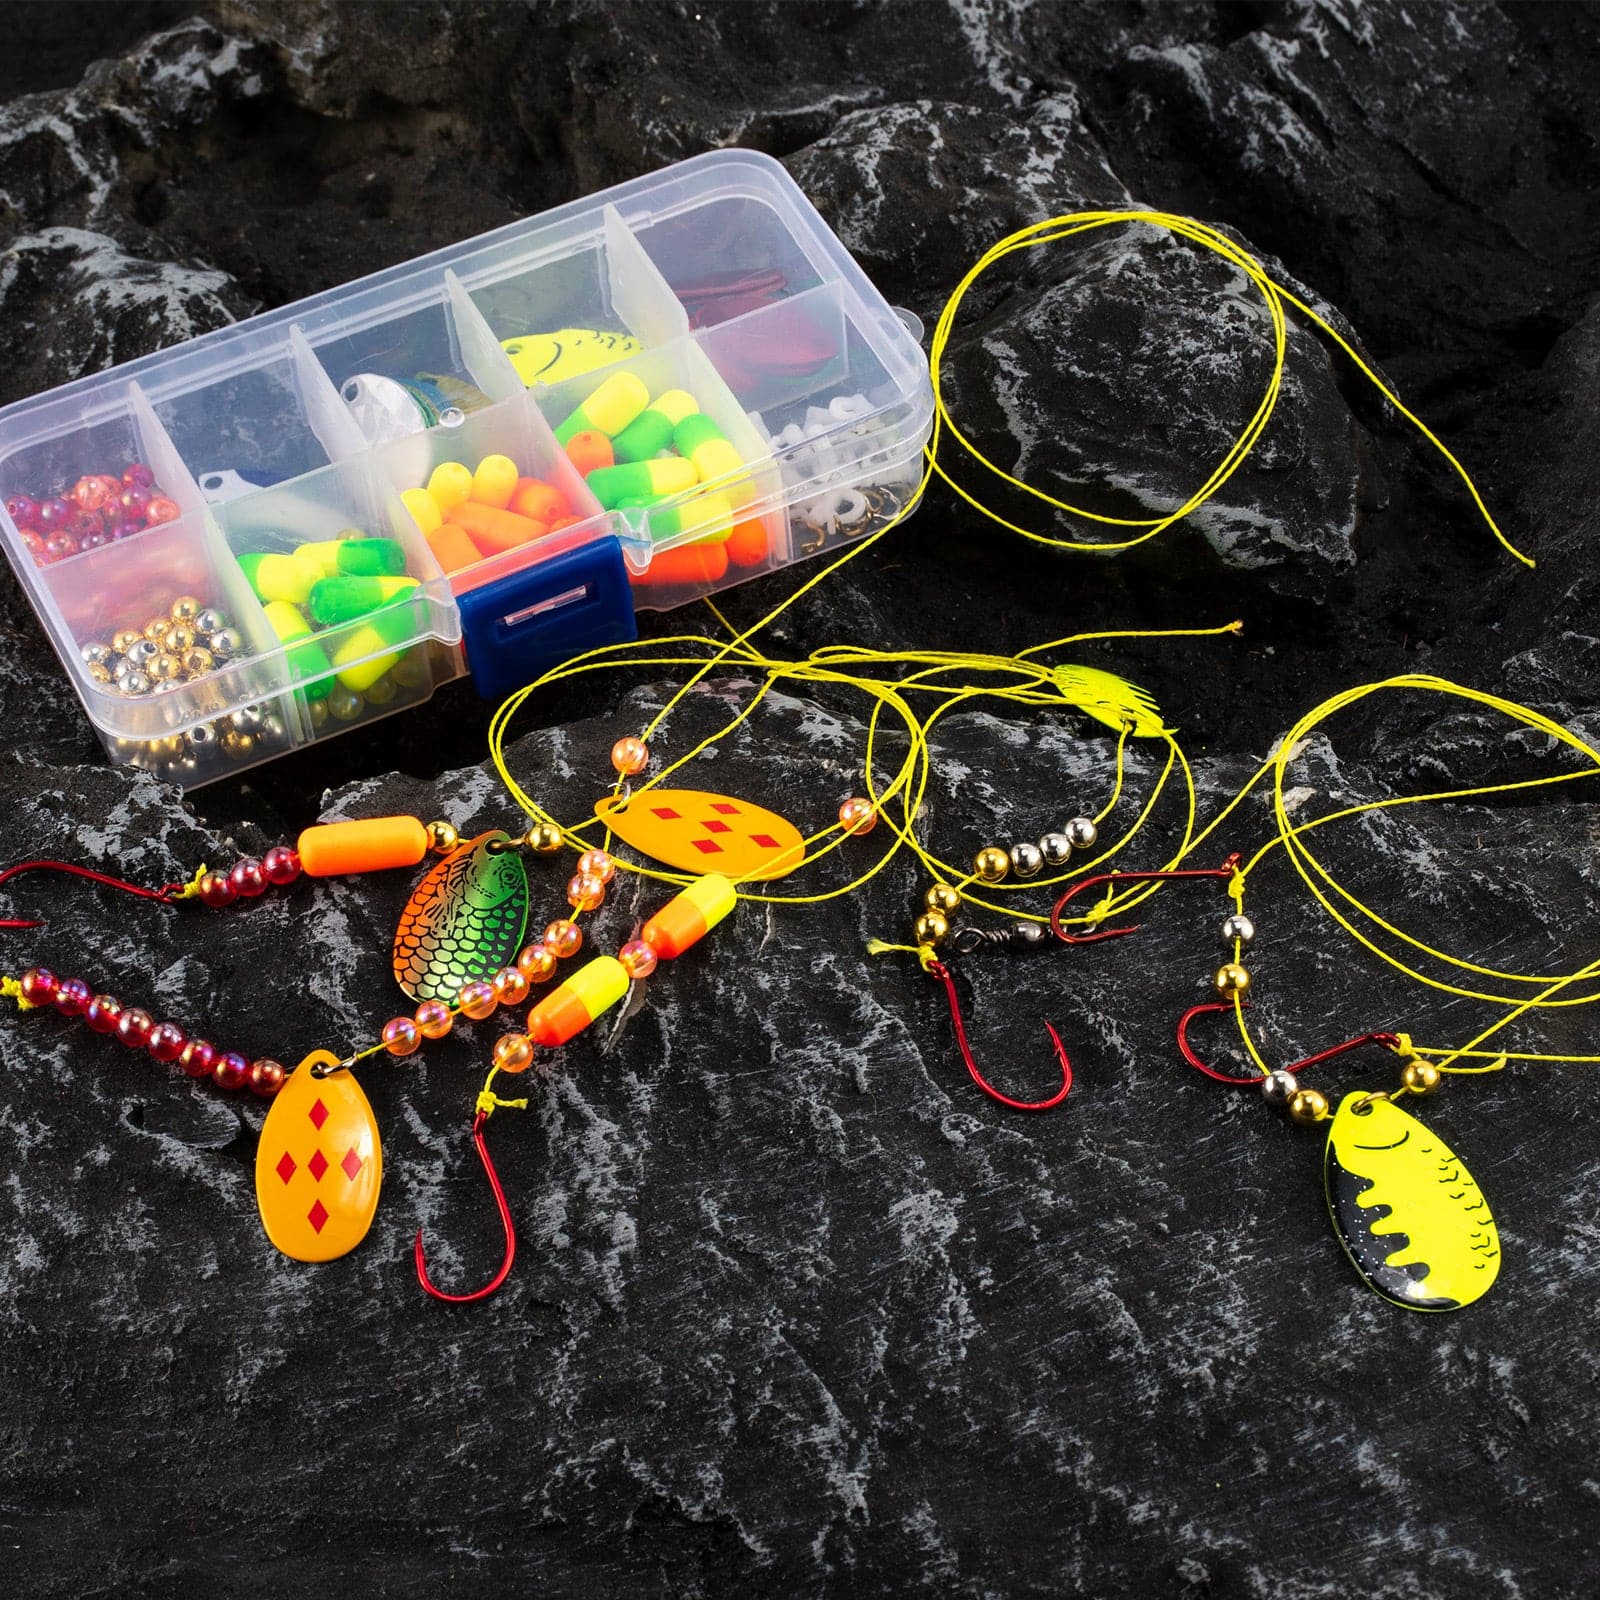  Dr.Fish 1410 Pieces Spinner Making Kit with Tackle Box Walleye  Rig Lure Making Supplies Spinner Blades Lure Bodies Rig Floats Spinnerbait  Shafts Freshwater Bass Fishing Materials : Sports & Outdoors